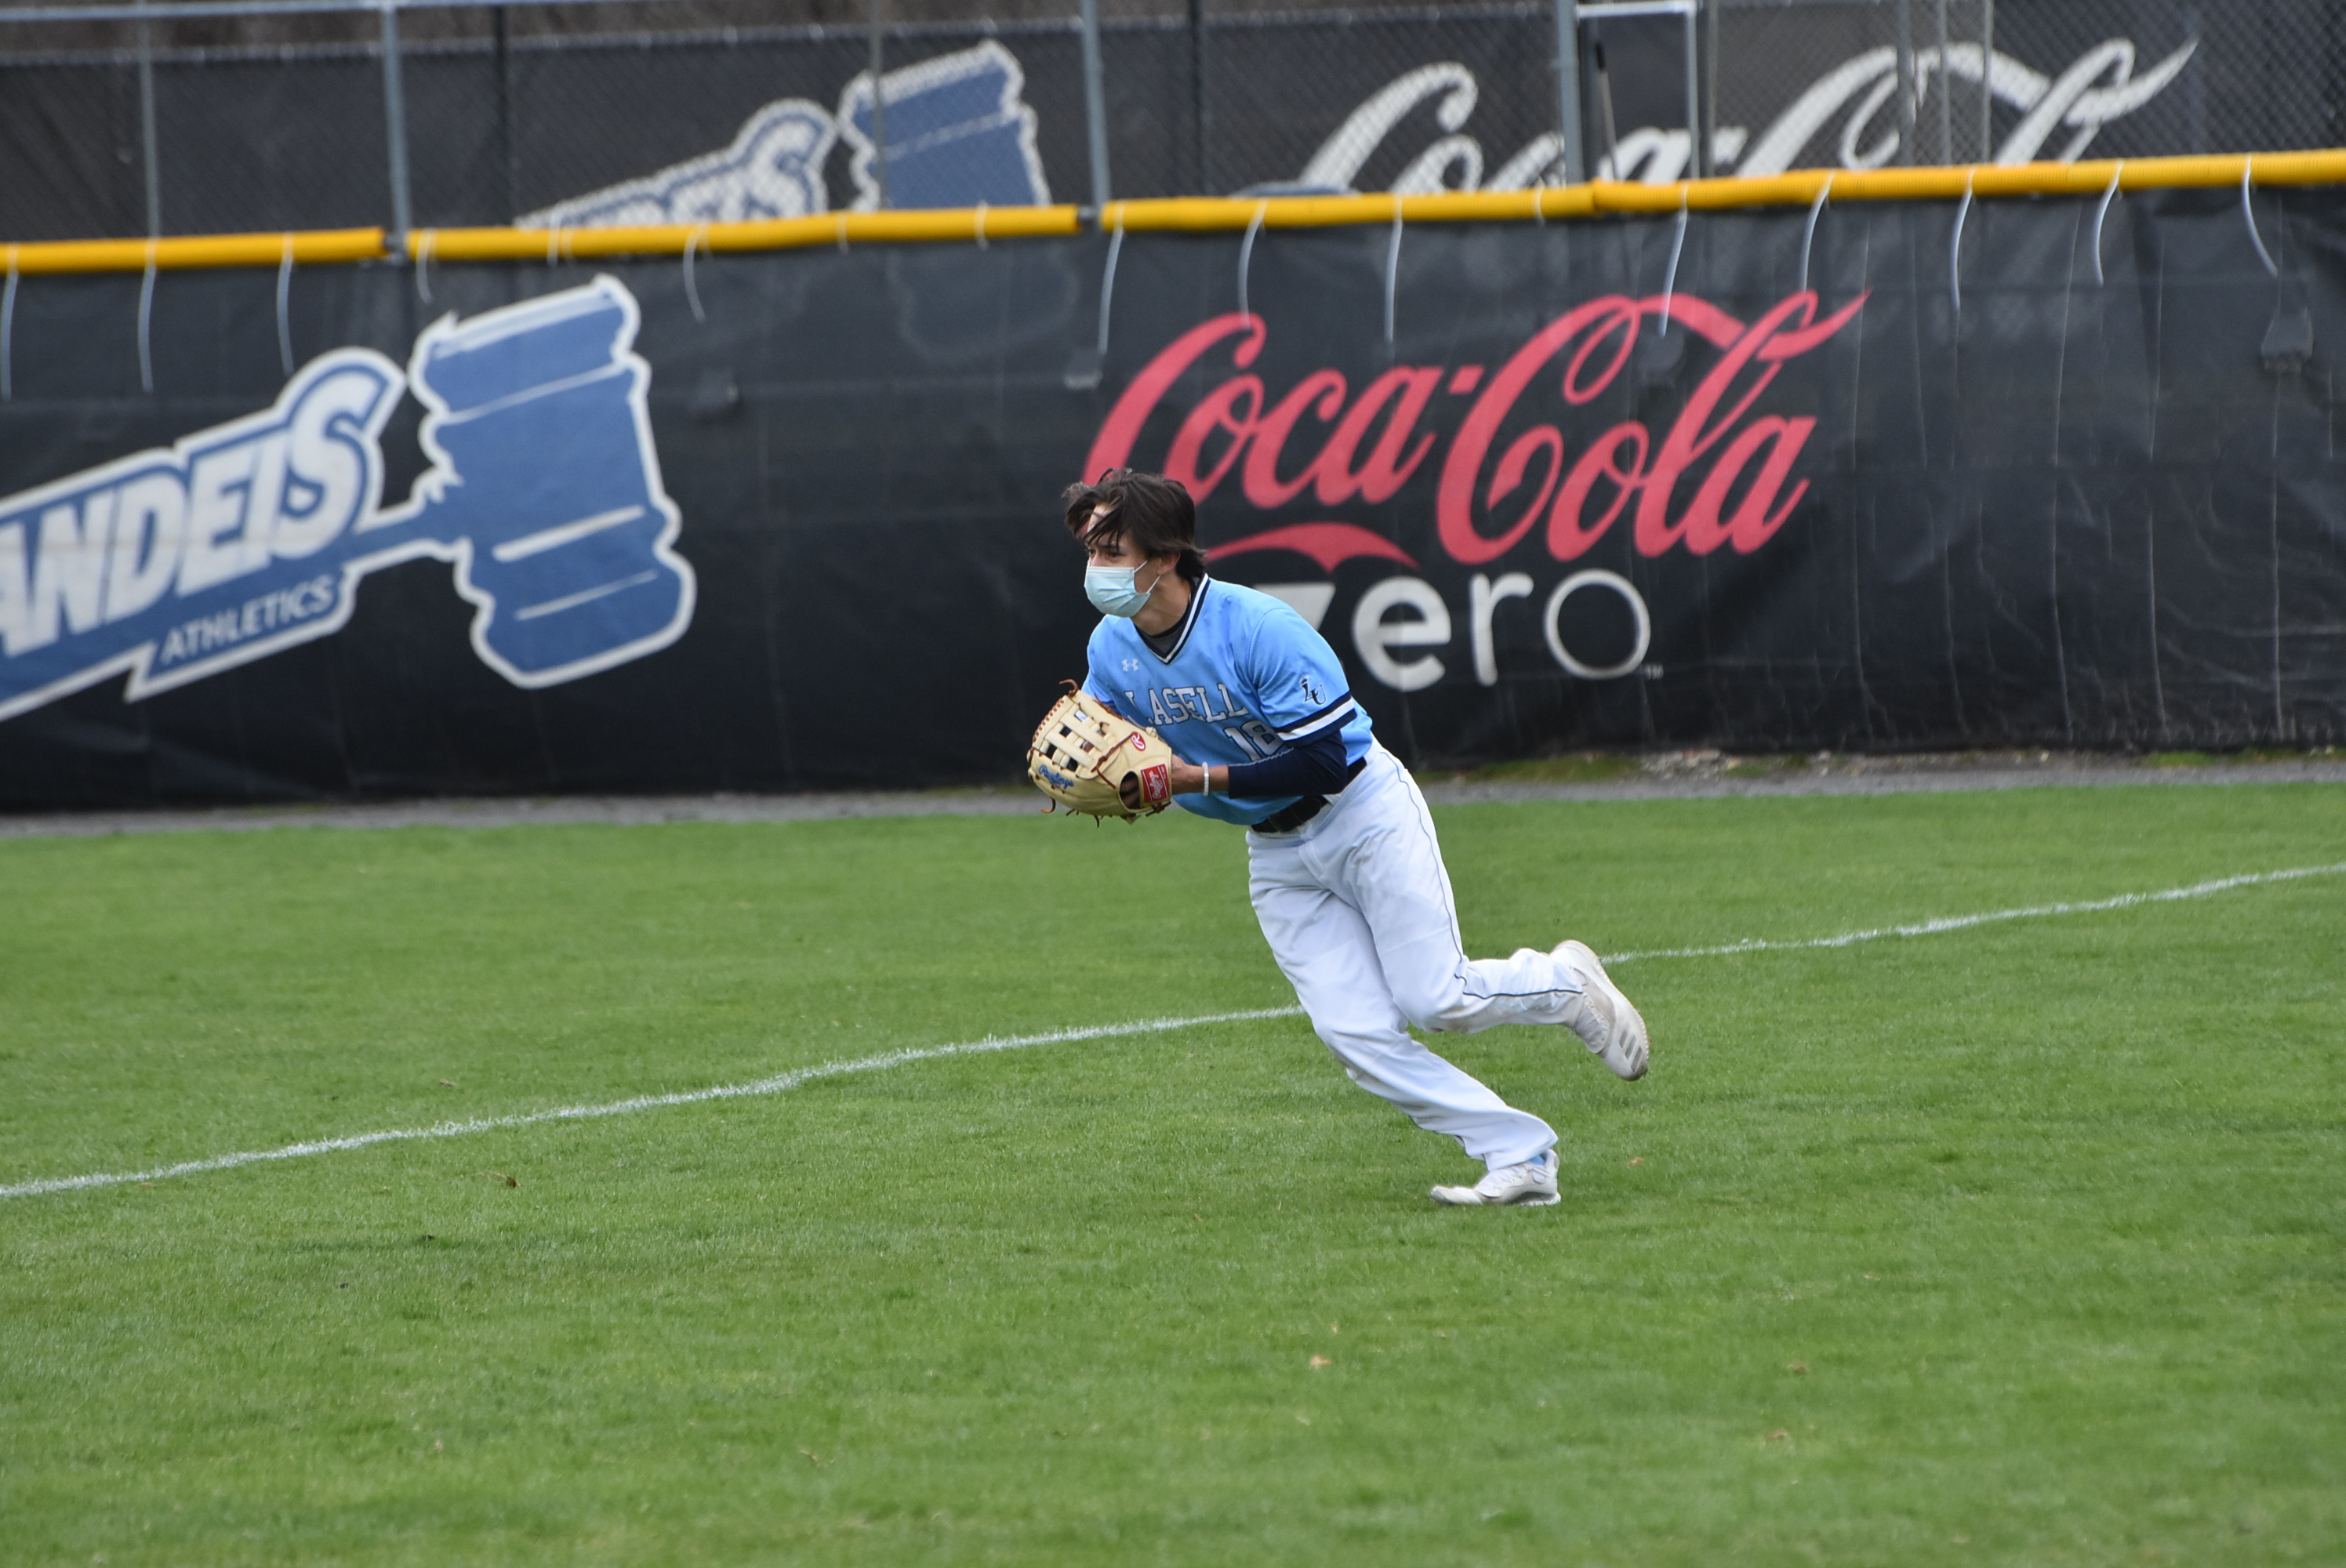 BSB: Lasell falls to Brandeis in non-conference battle